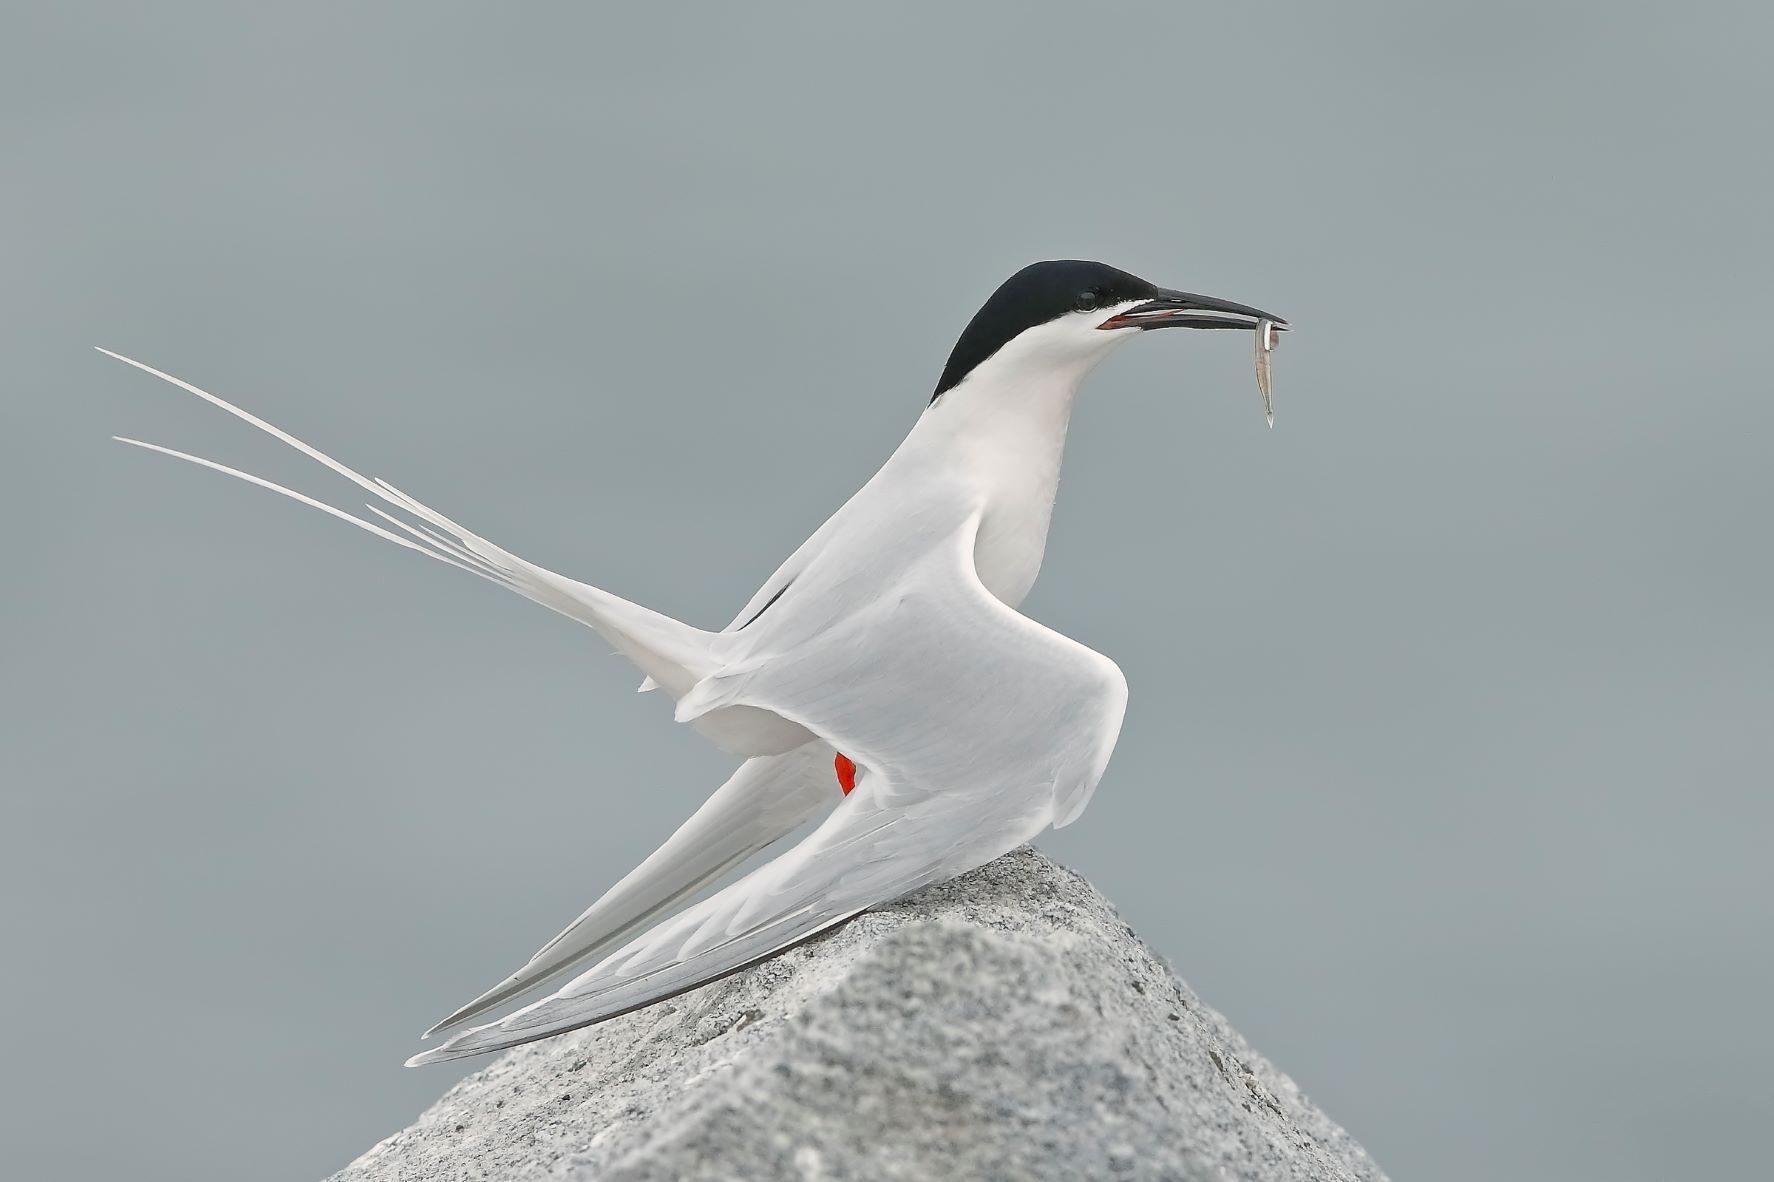 The Roseate Tern is occasionally seen at New York City beaches. Listed as Endangered in New York State, this elegant species breeds at the eastern tip of Long Island and forages in the New York Bight. Photo: Ann Pacheco/Audubon Photography Awards